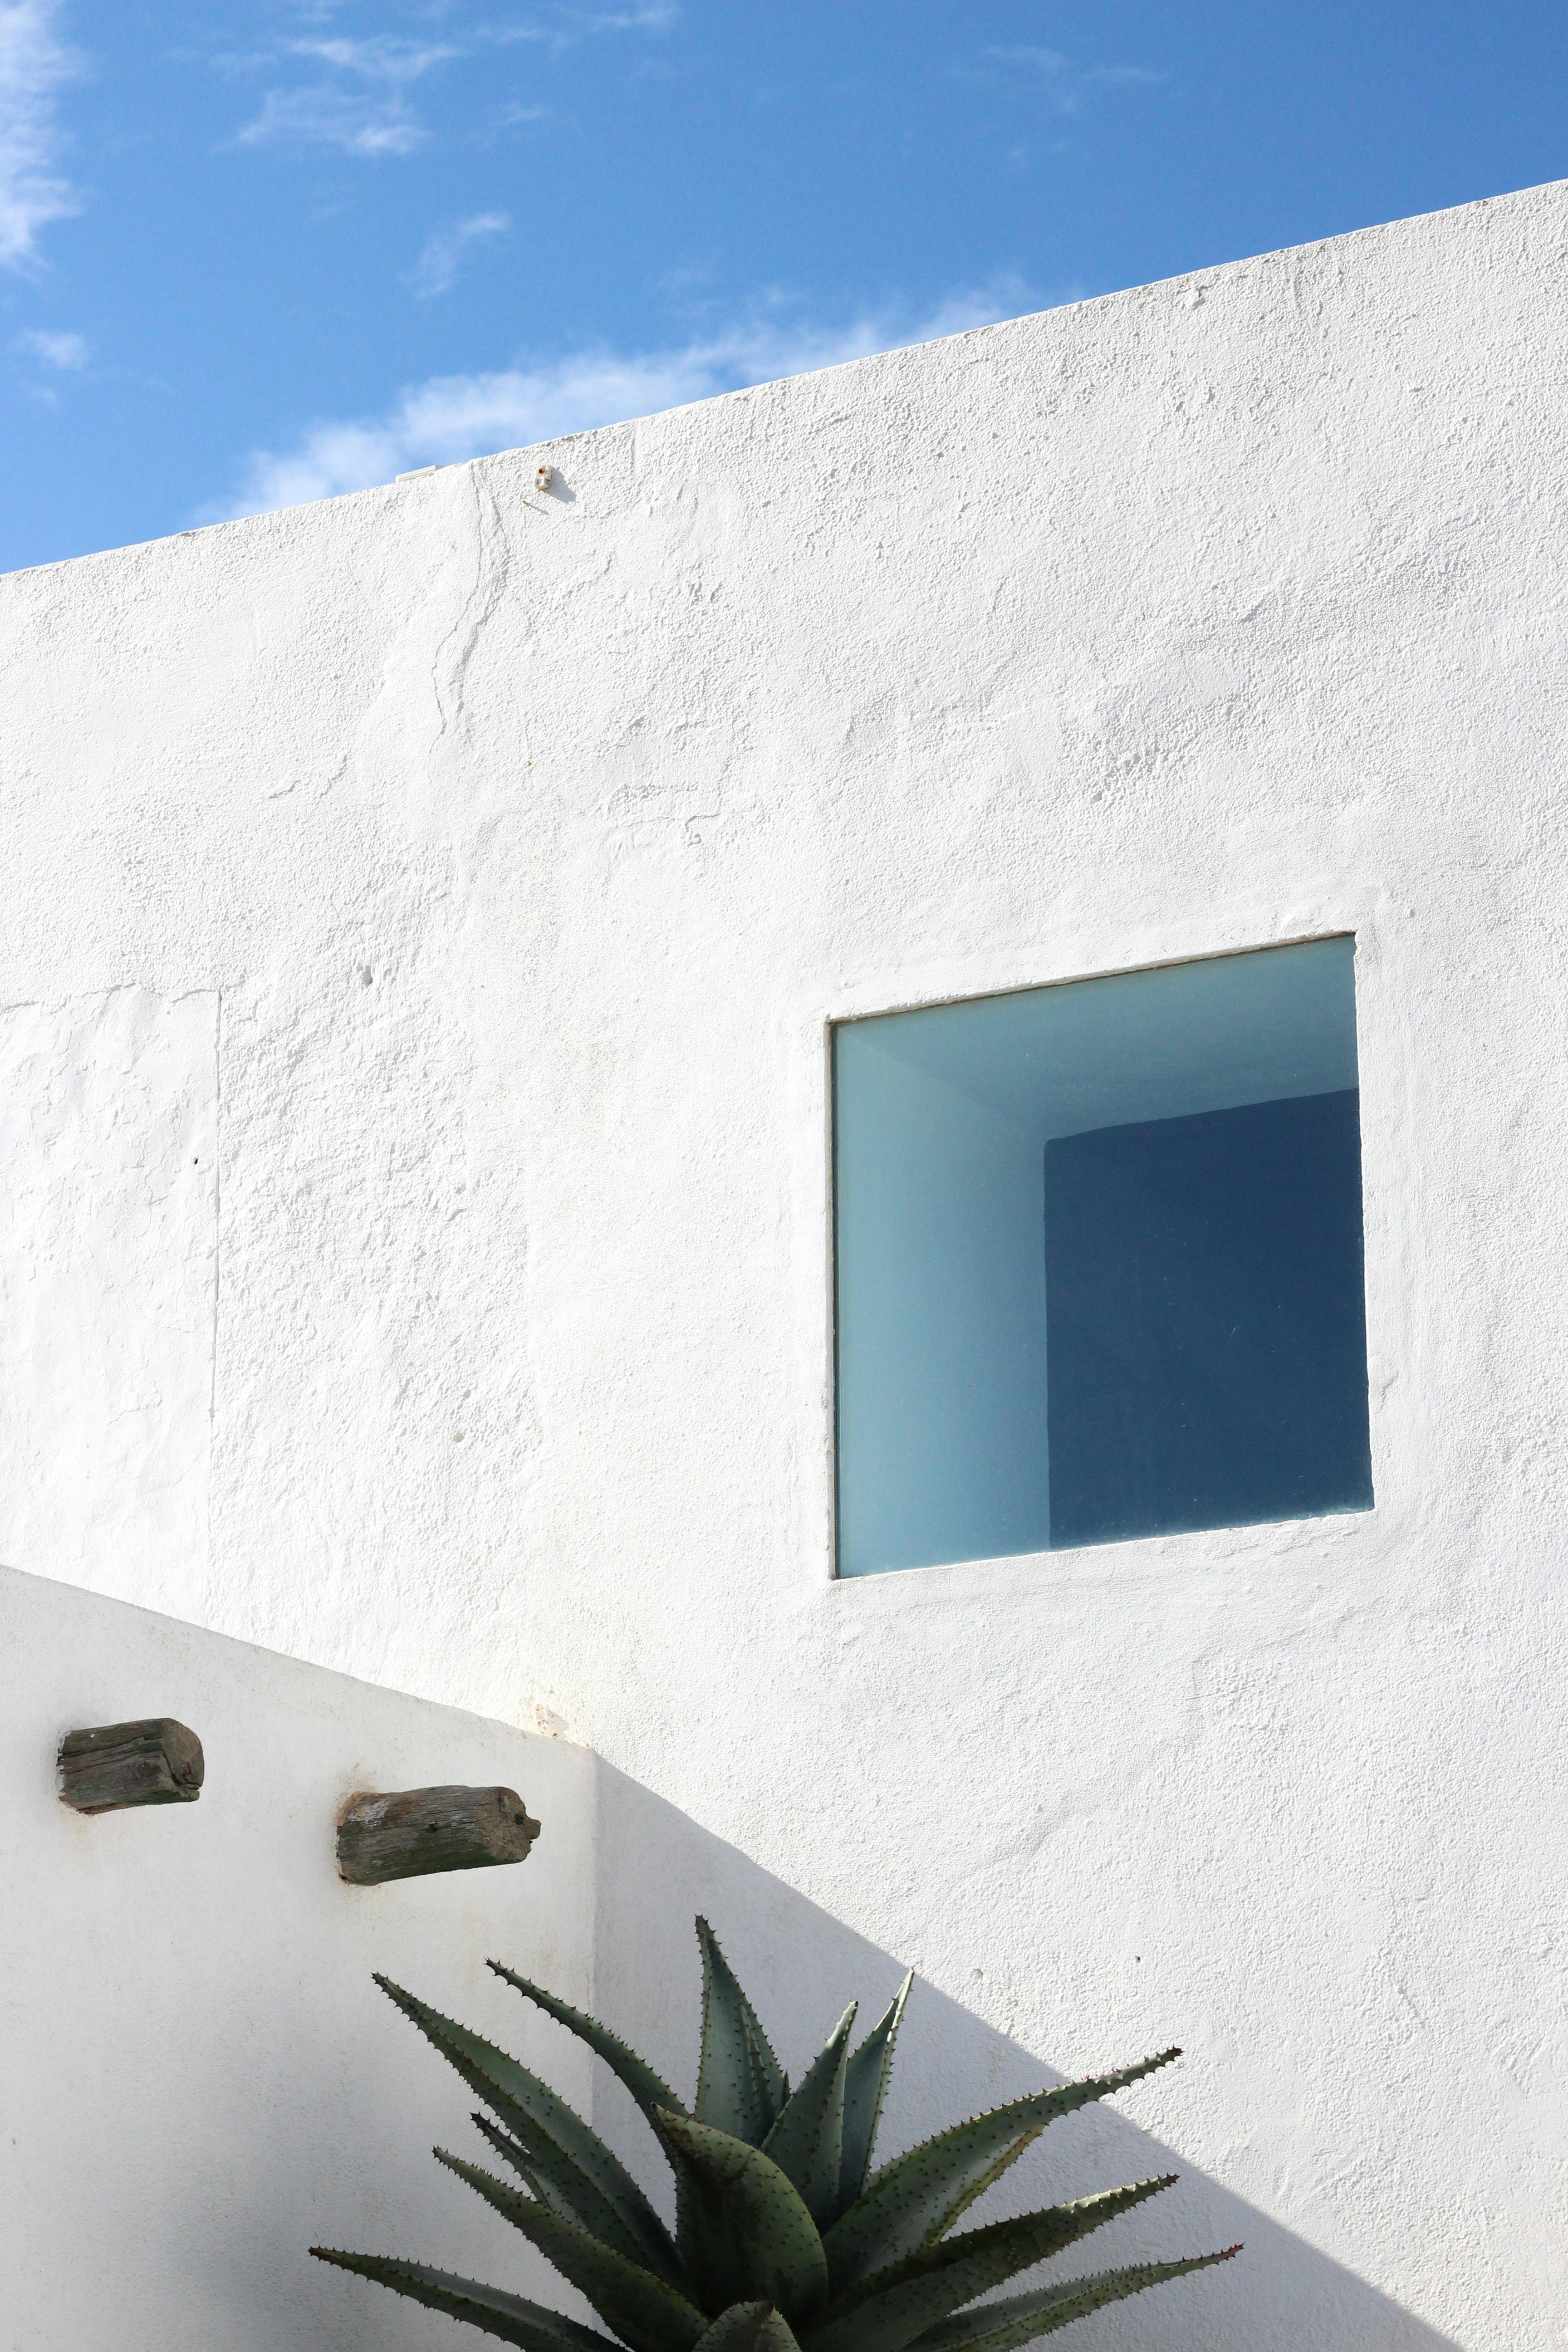 Photo of a traditional house in Lanzarote, Canary Islands, Spain